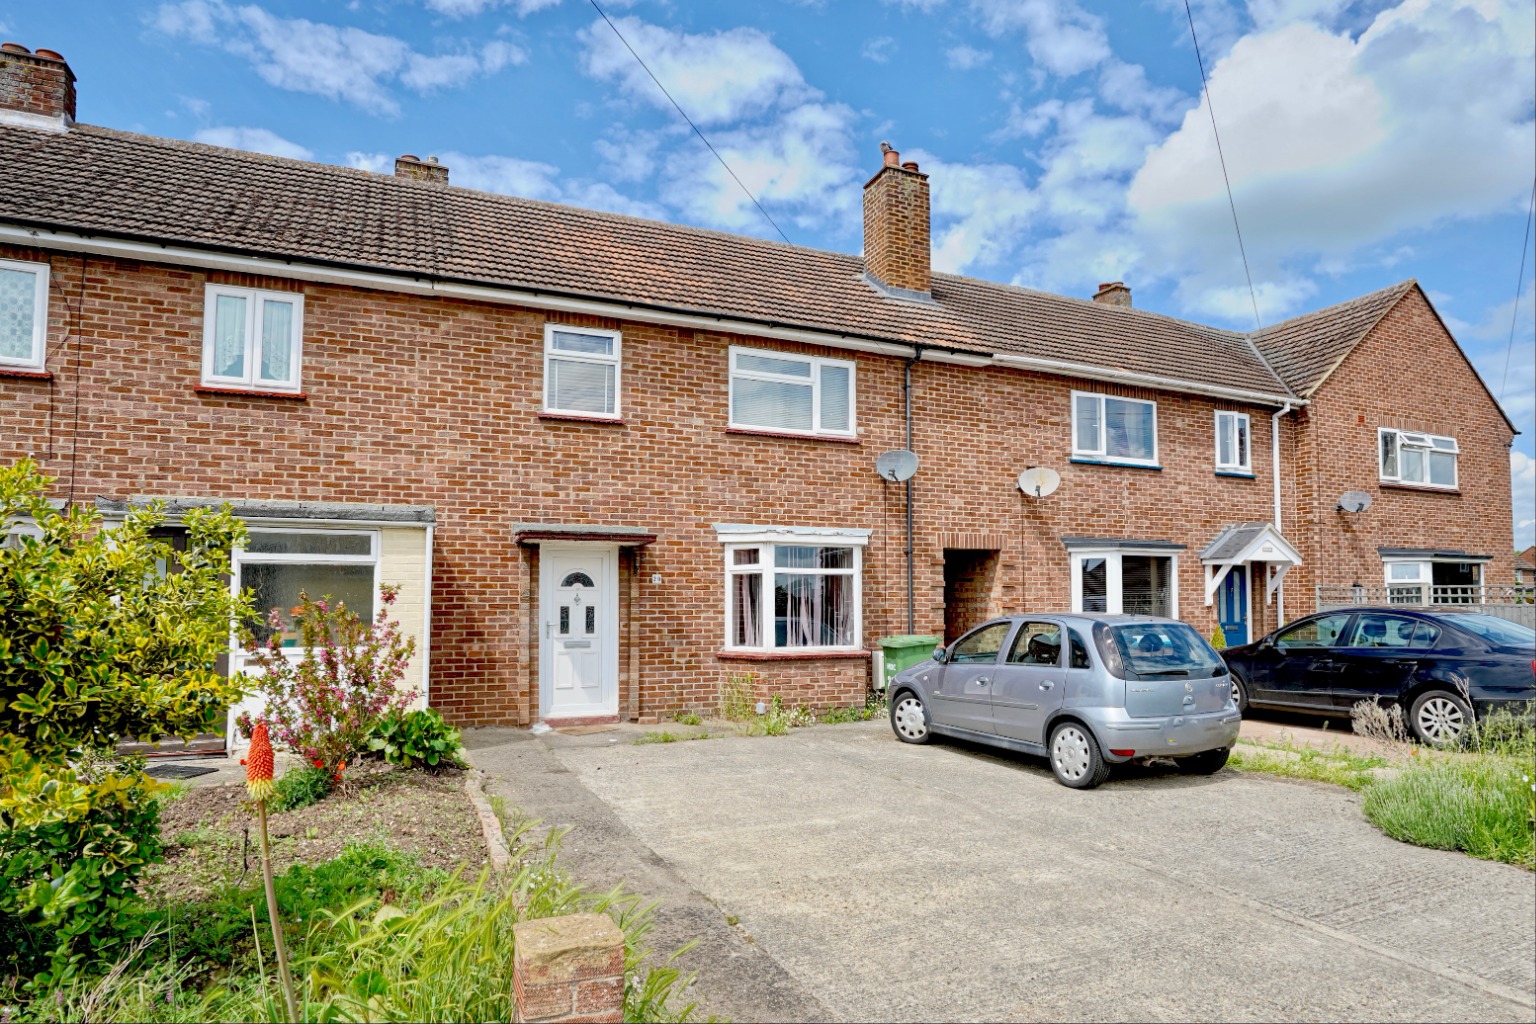 3 bed terraced house for sale in Leys Road, St. Neots - Property Image 1